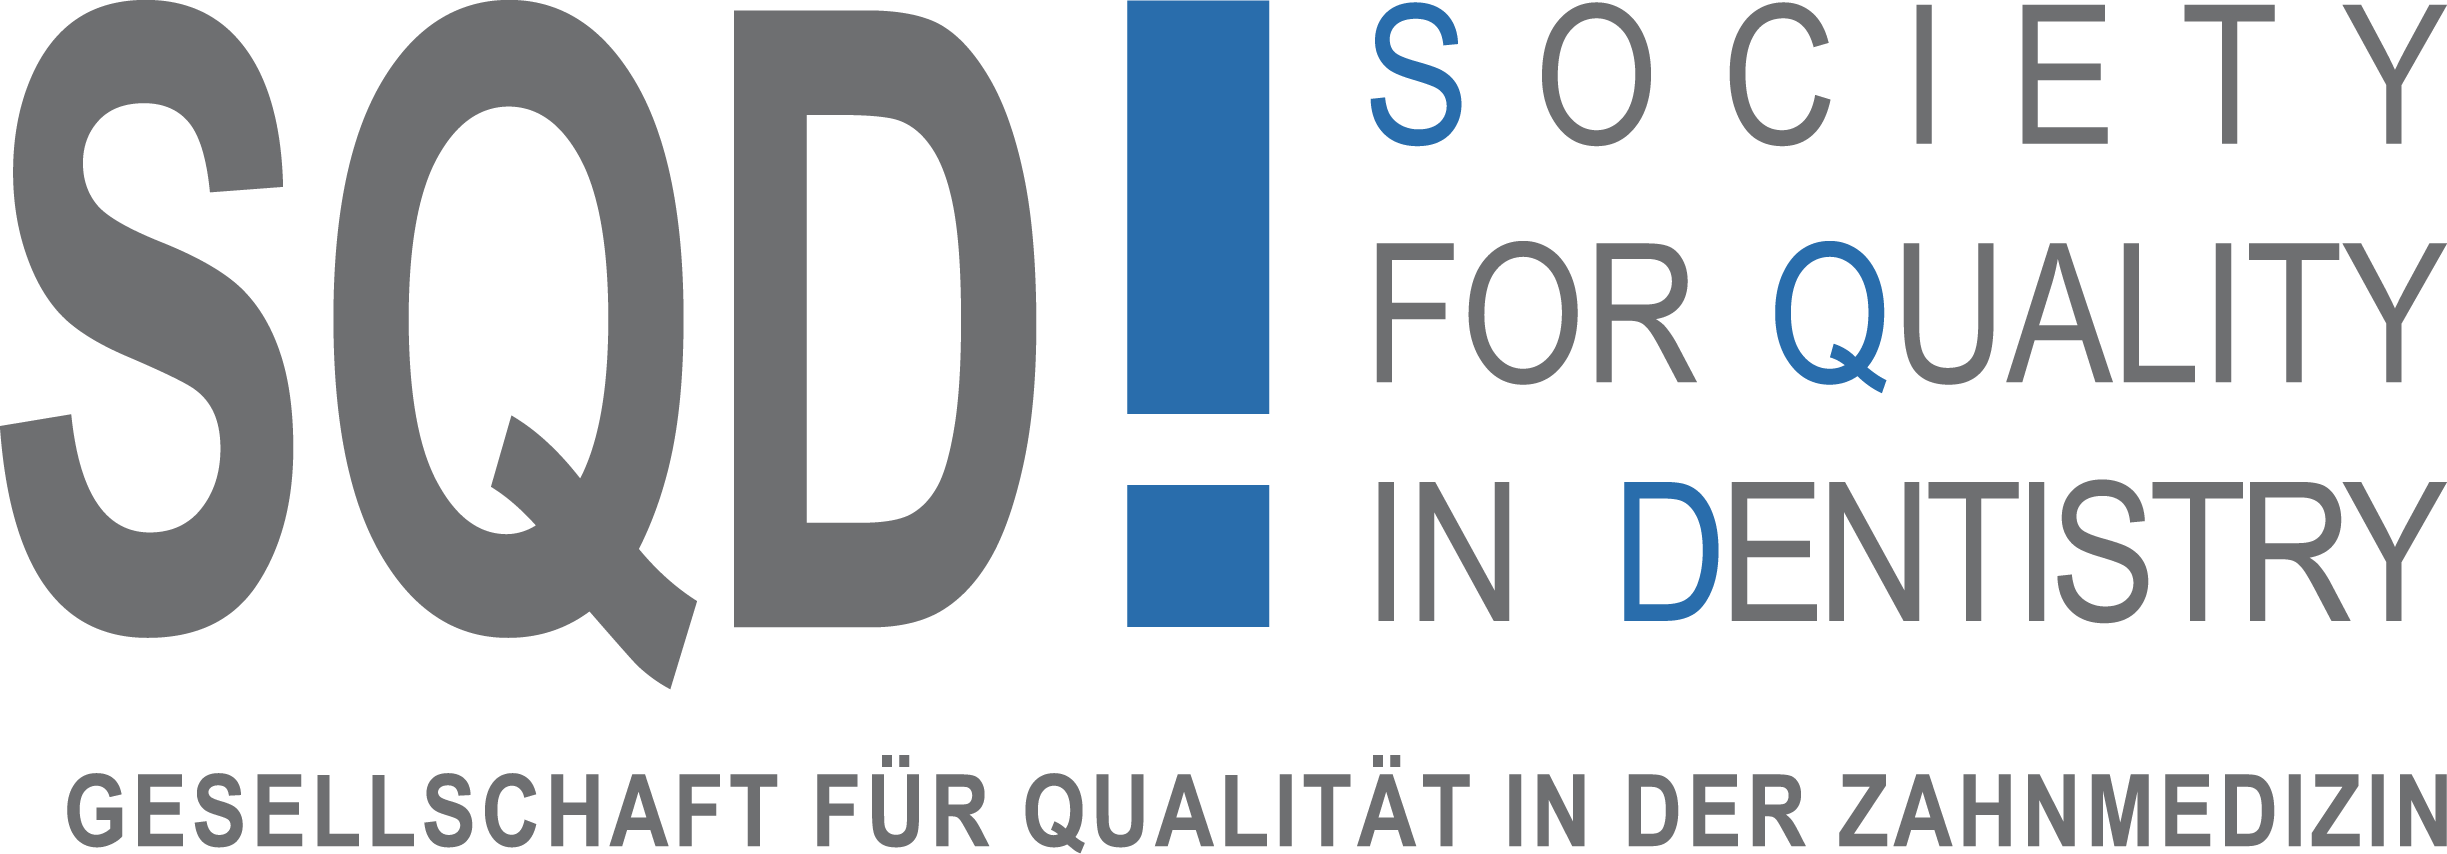 SQD - Society for Quality in Dentistry